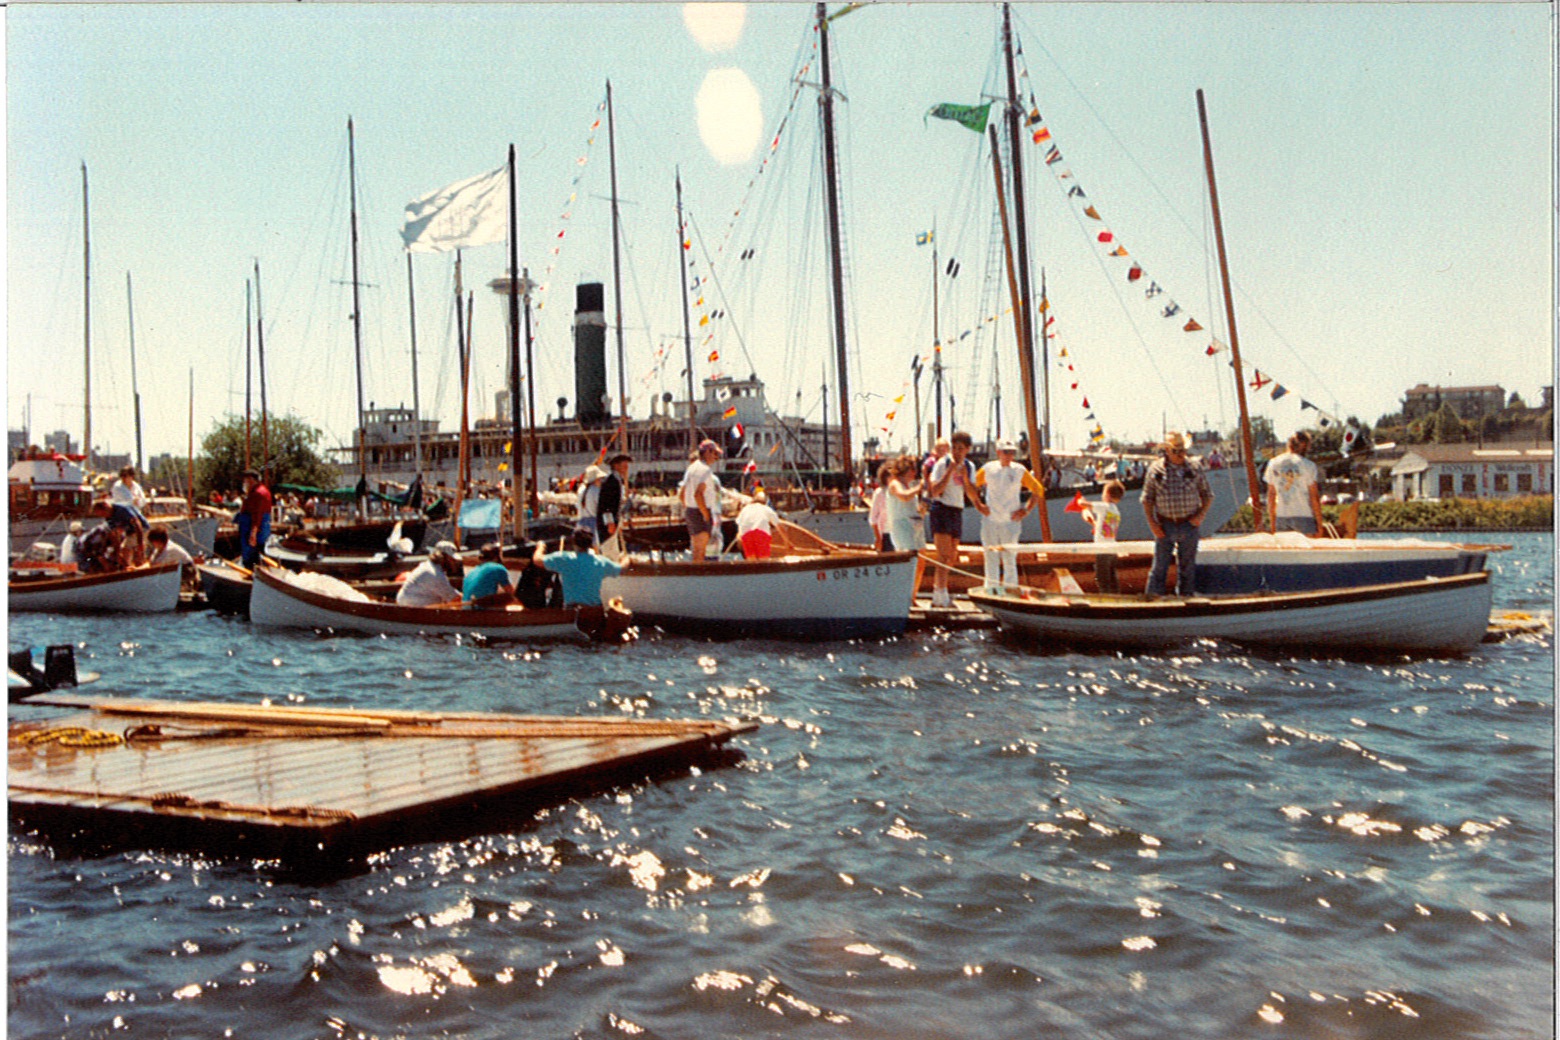 The Center for Wooden Boats festival in the 1970s